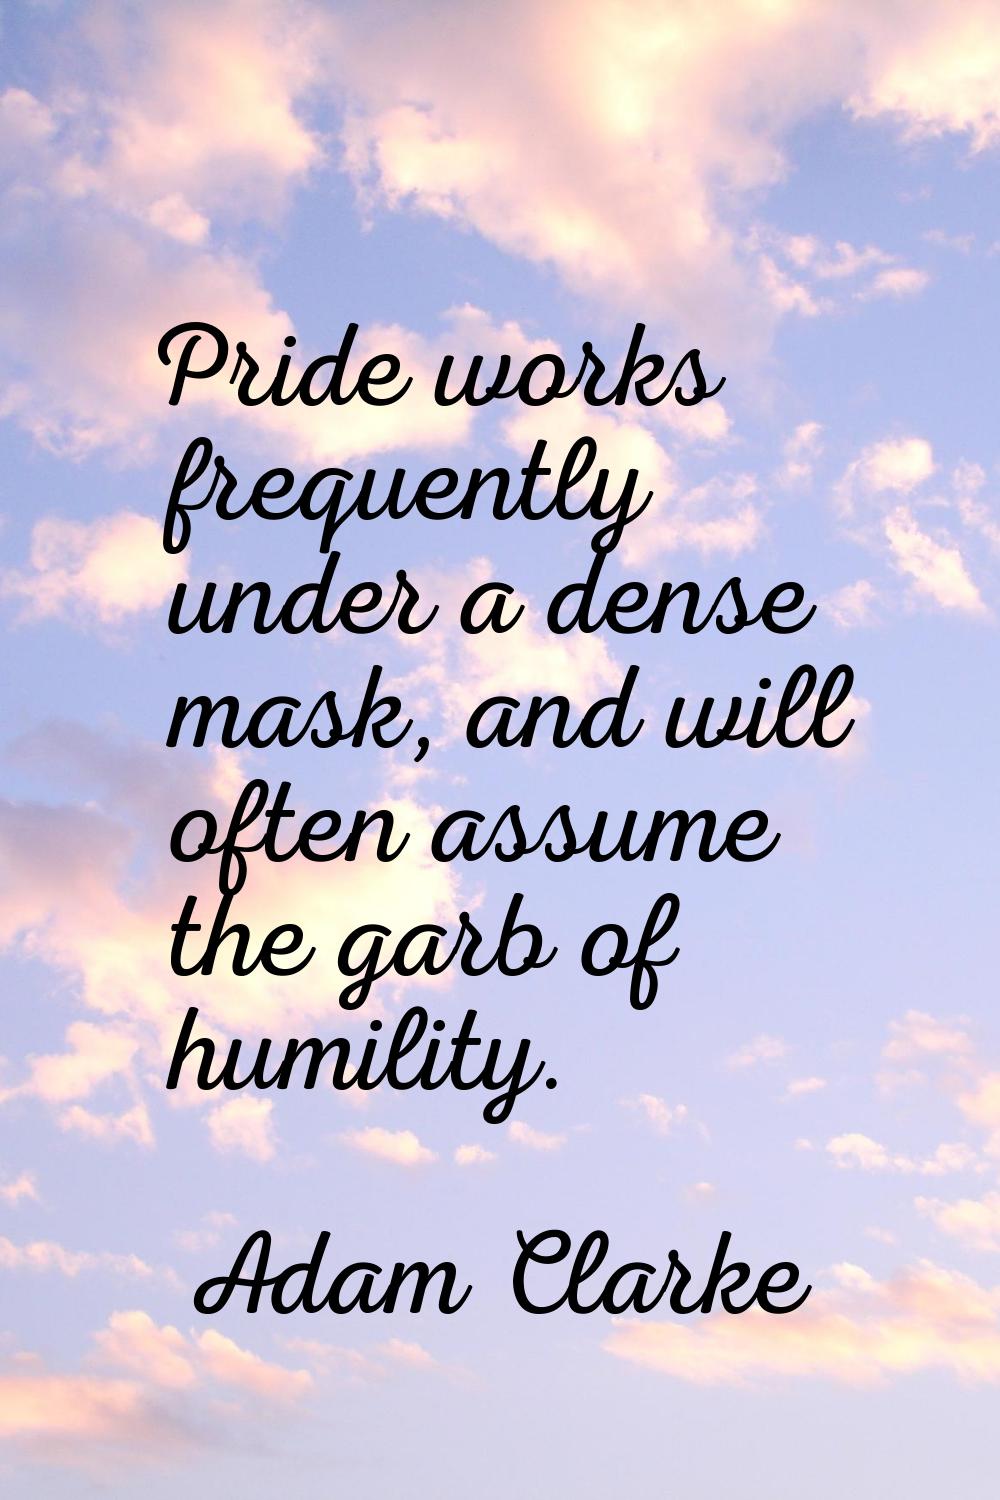 Pride works frequently under a dense mask, and will often assume the garb of humility.